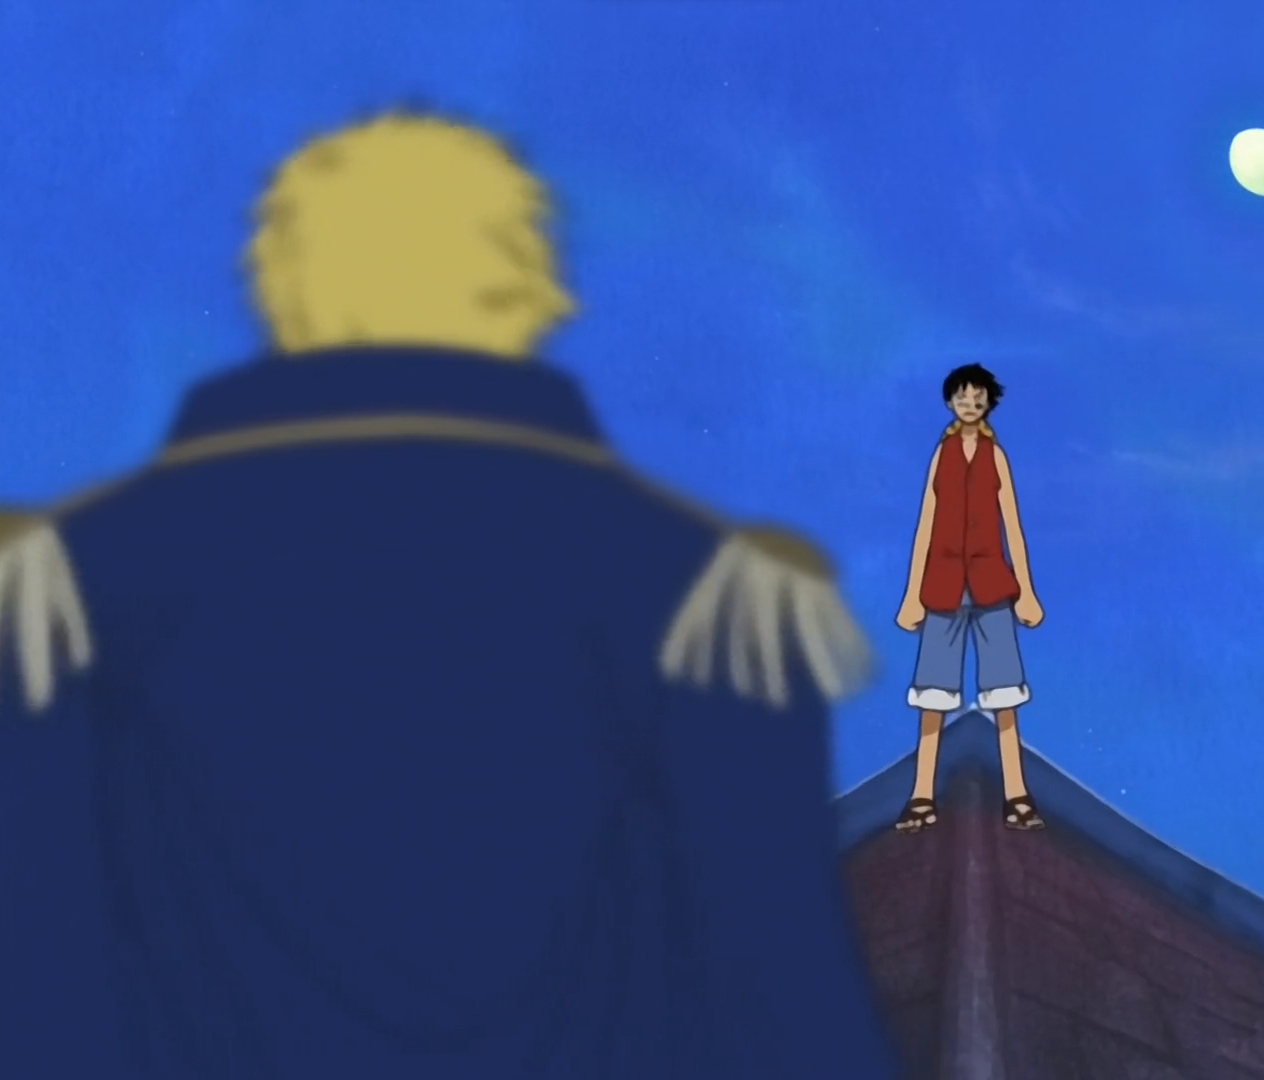 One Piece Jaya Island Arc Luffy faces Bellamy at a roof in Mock Town